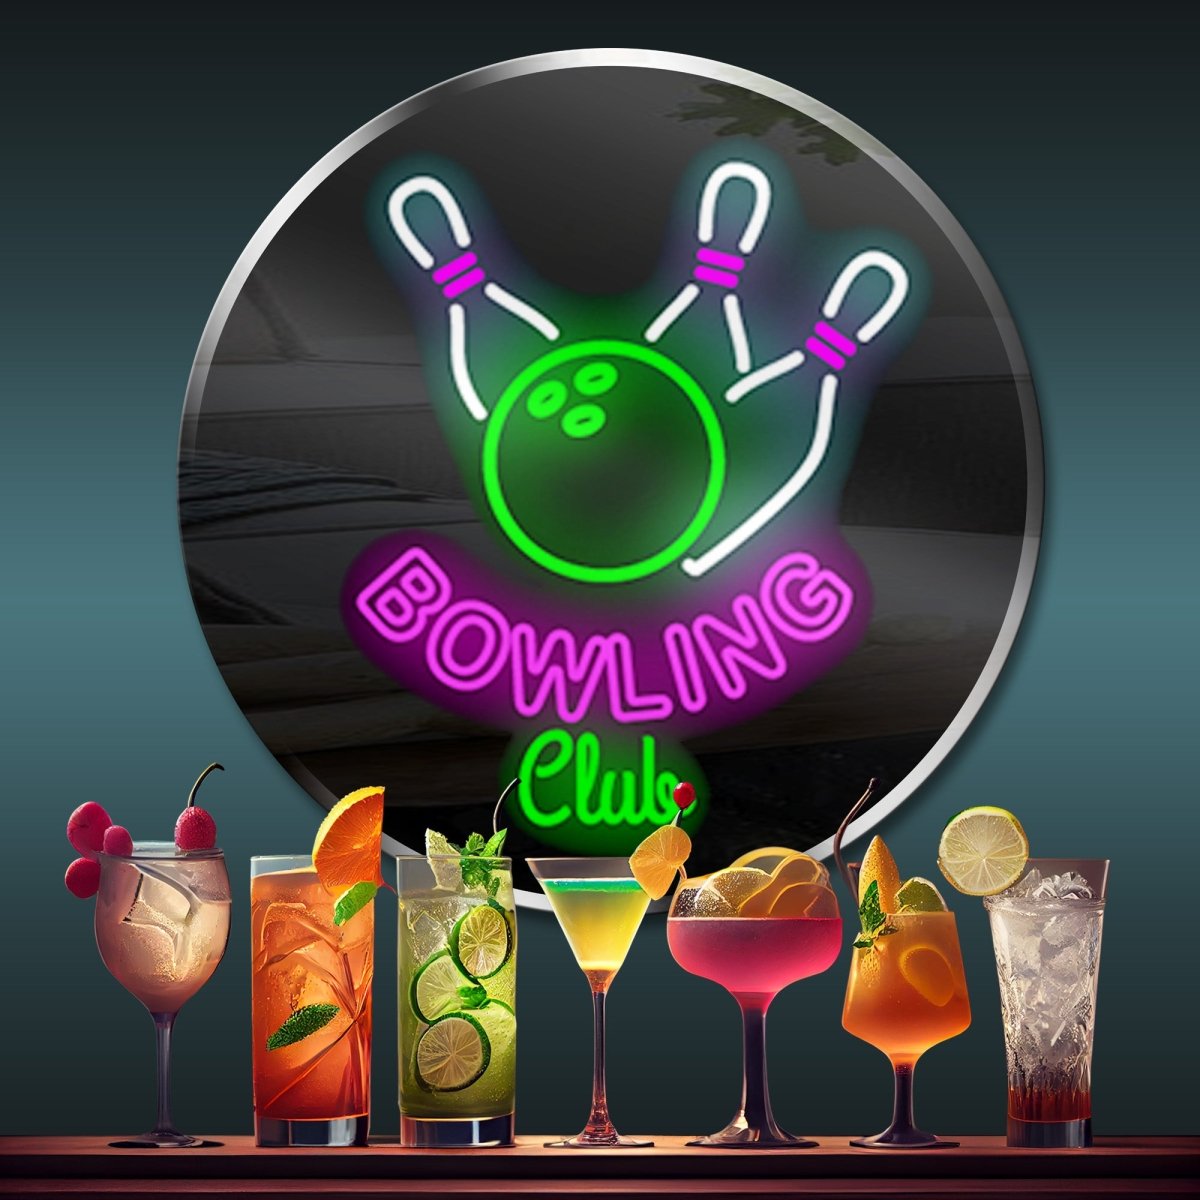 Personalized Neon Sign Bowling Club - madaboutneon